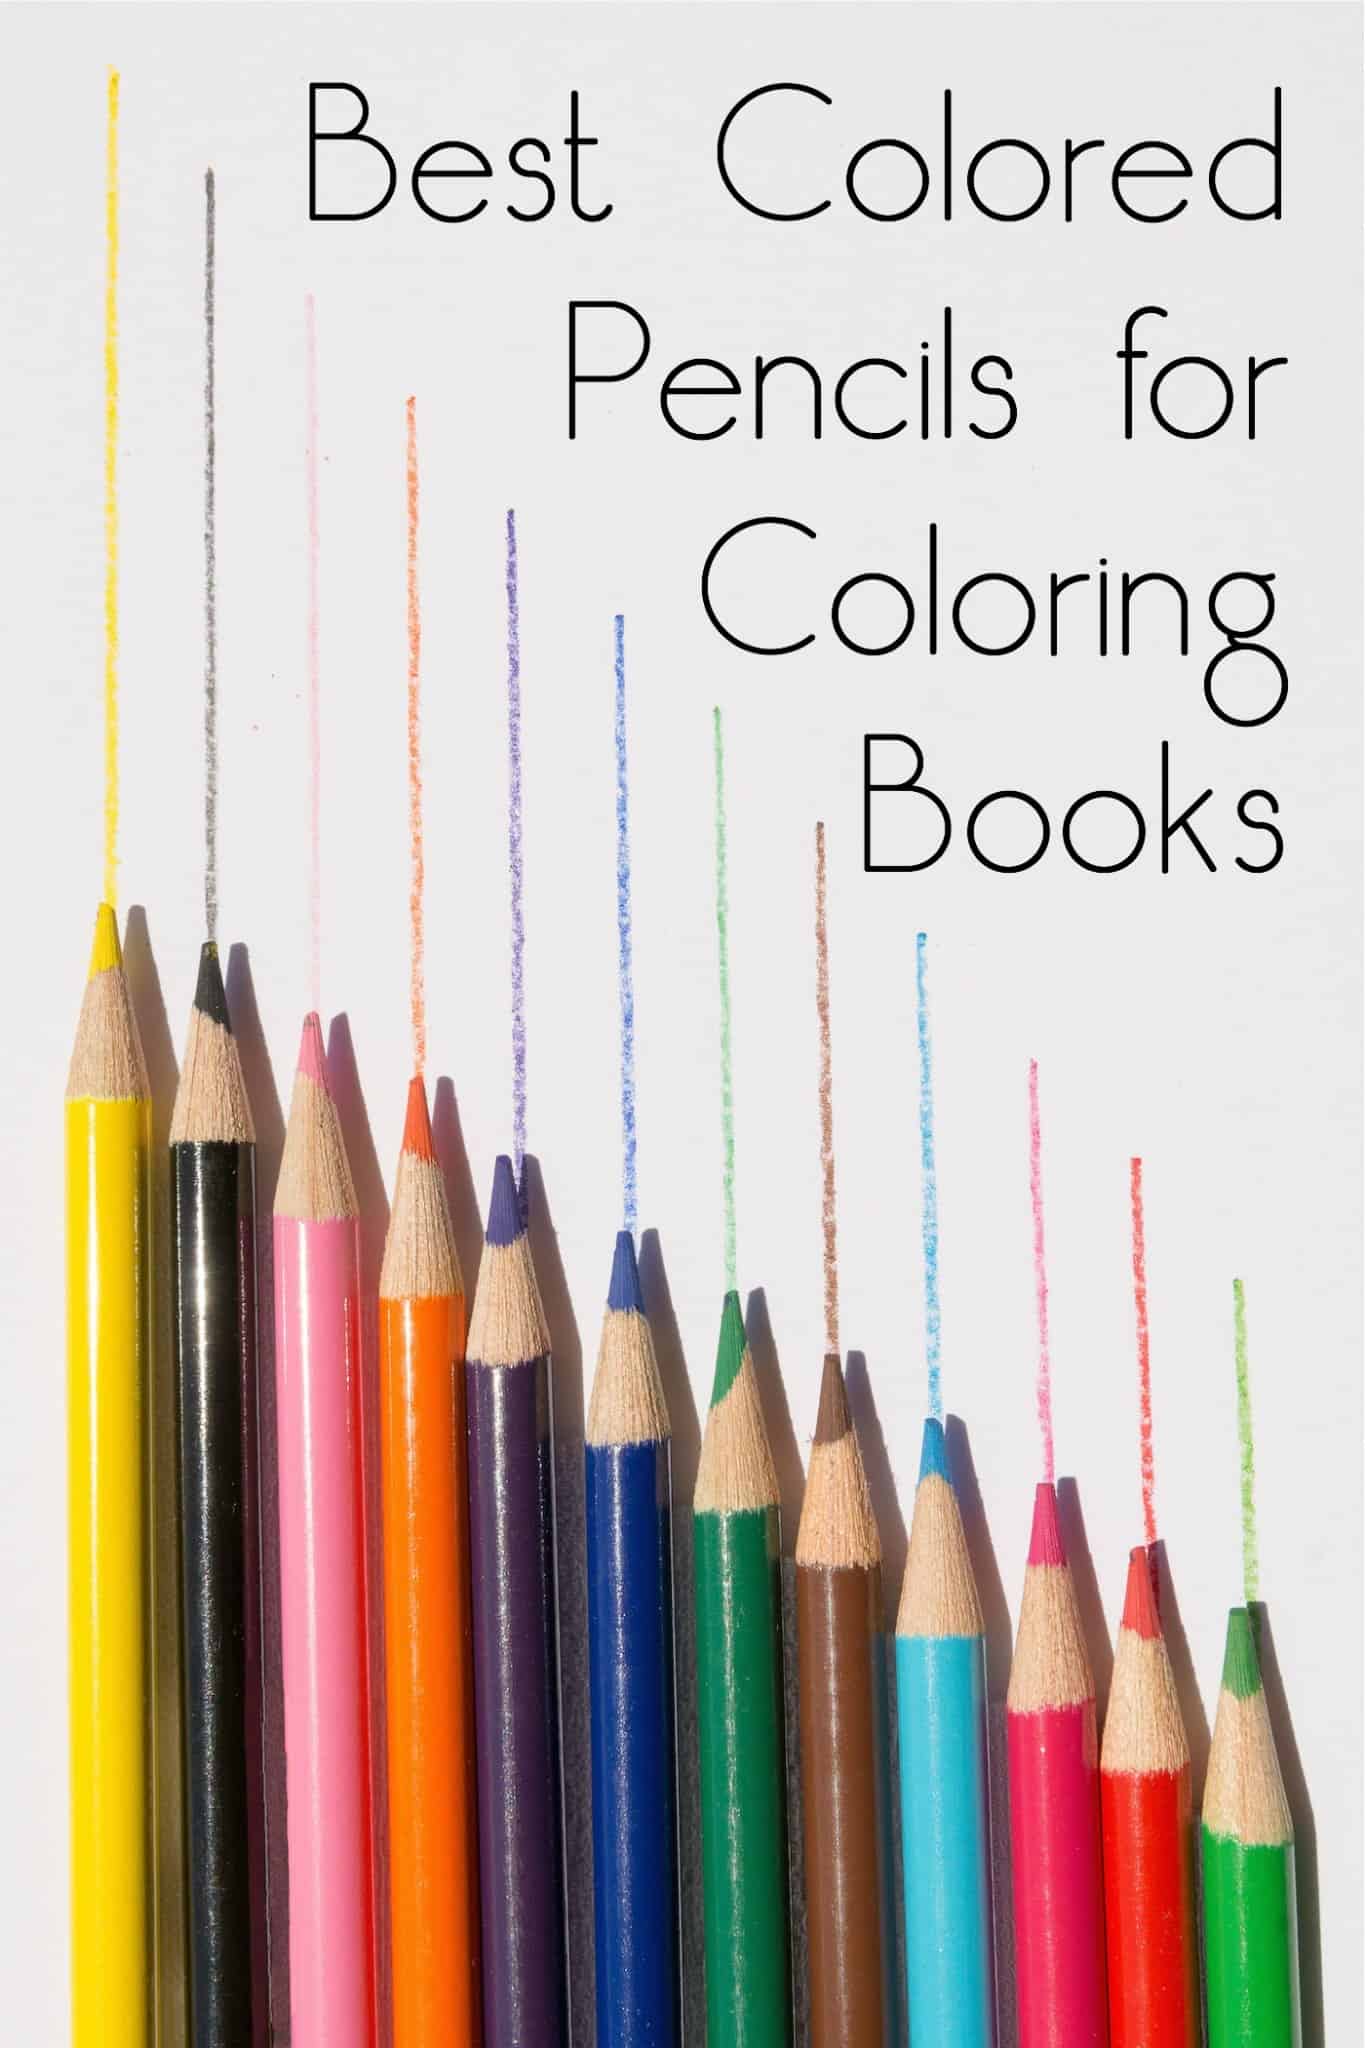 Best Colored Pencils for Coloring Books